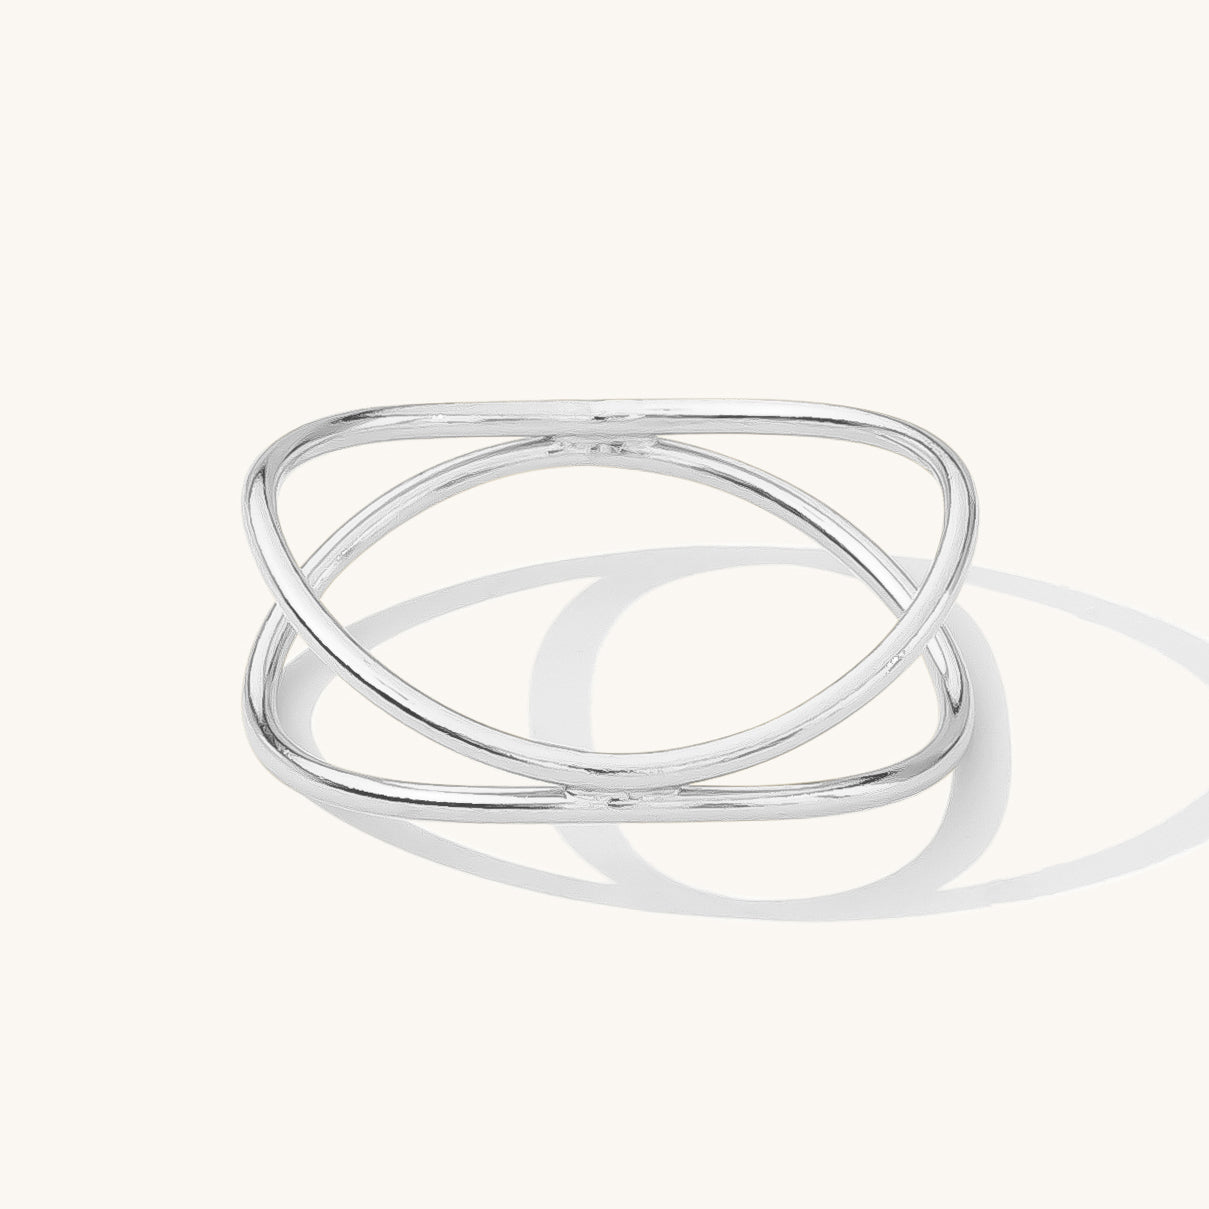 Curved Ring | Simple & Dainty Jewelry